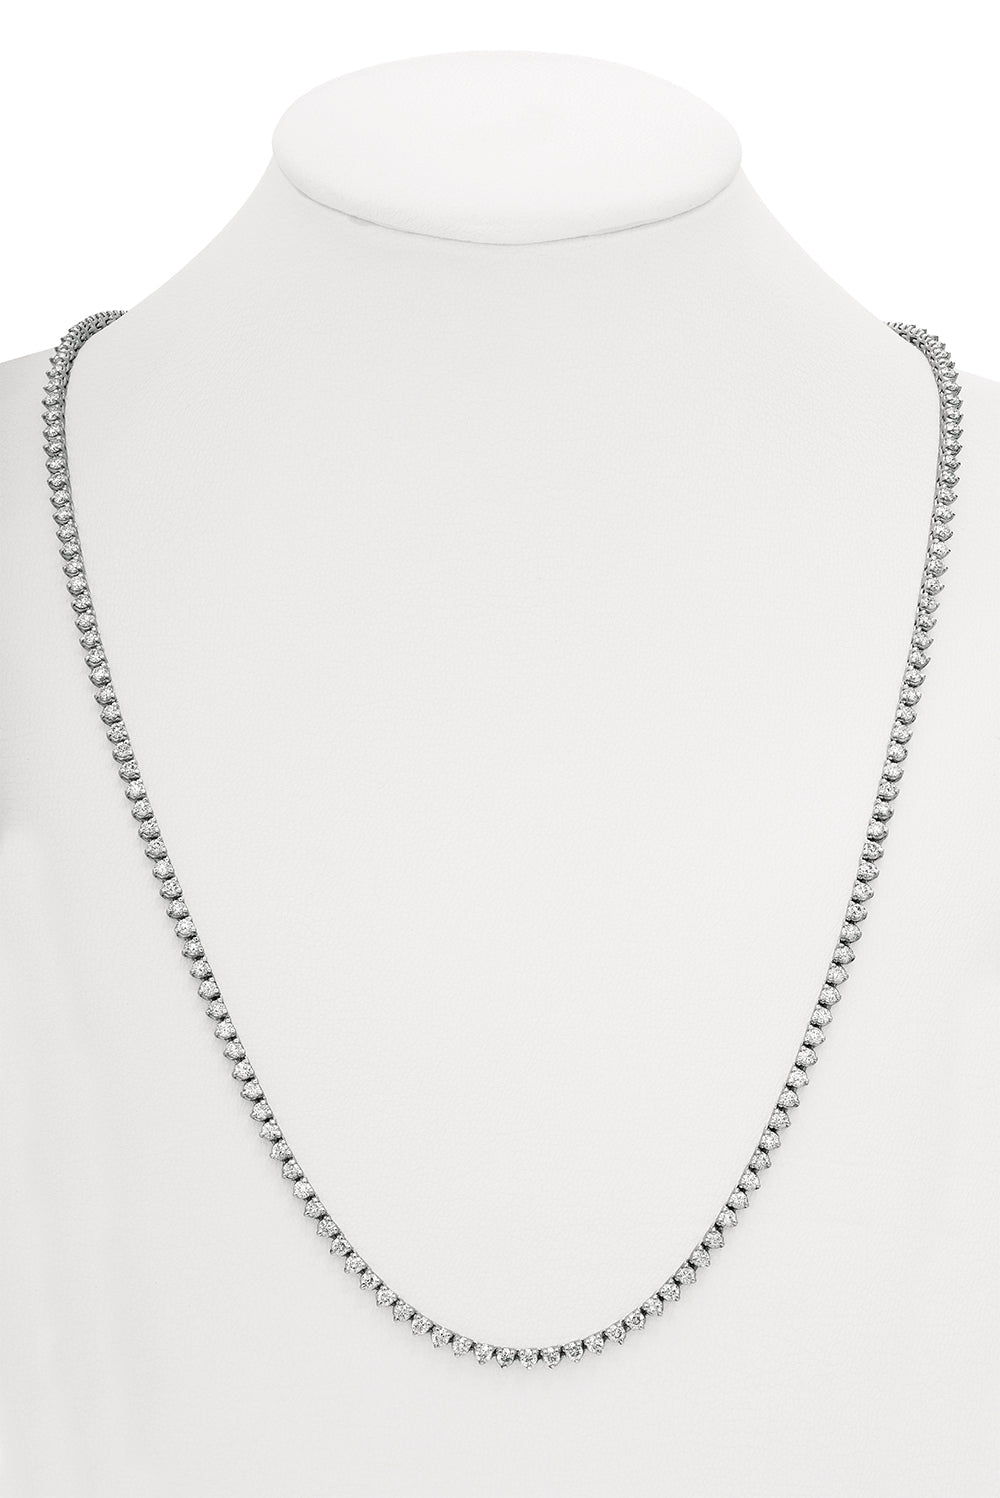 Find Your Perfect Diamond Necklace at Davizi Jewels | NYC